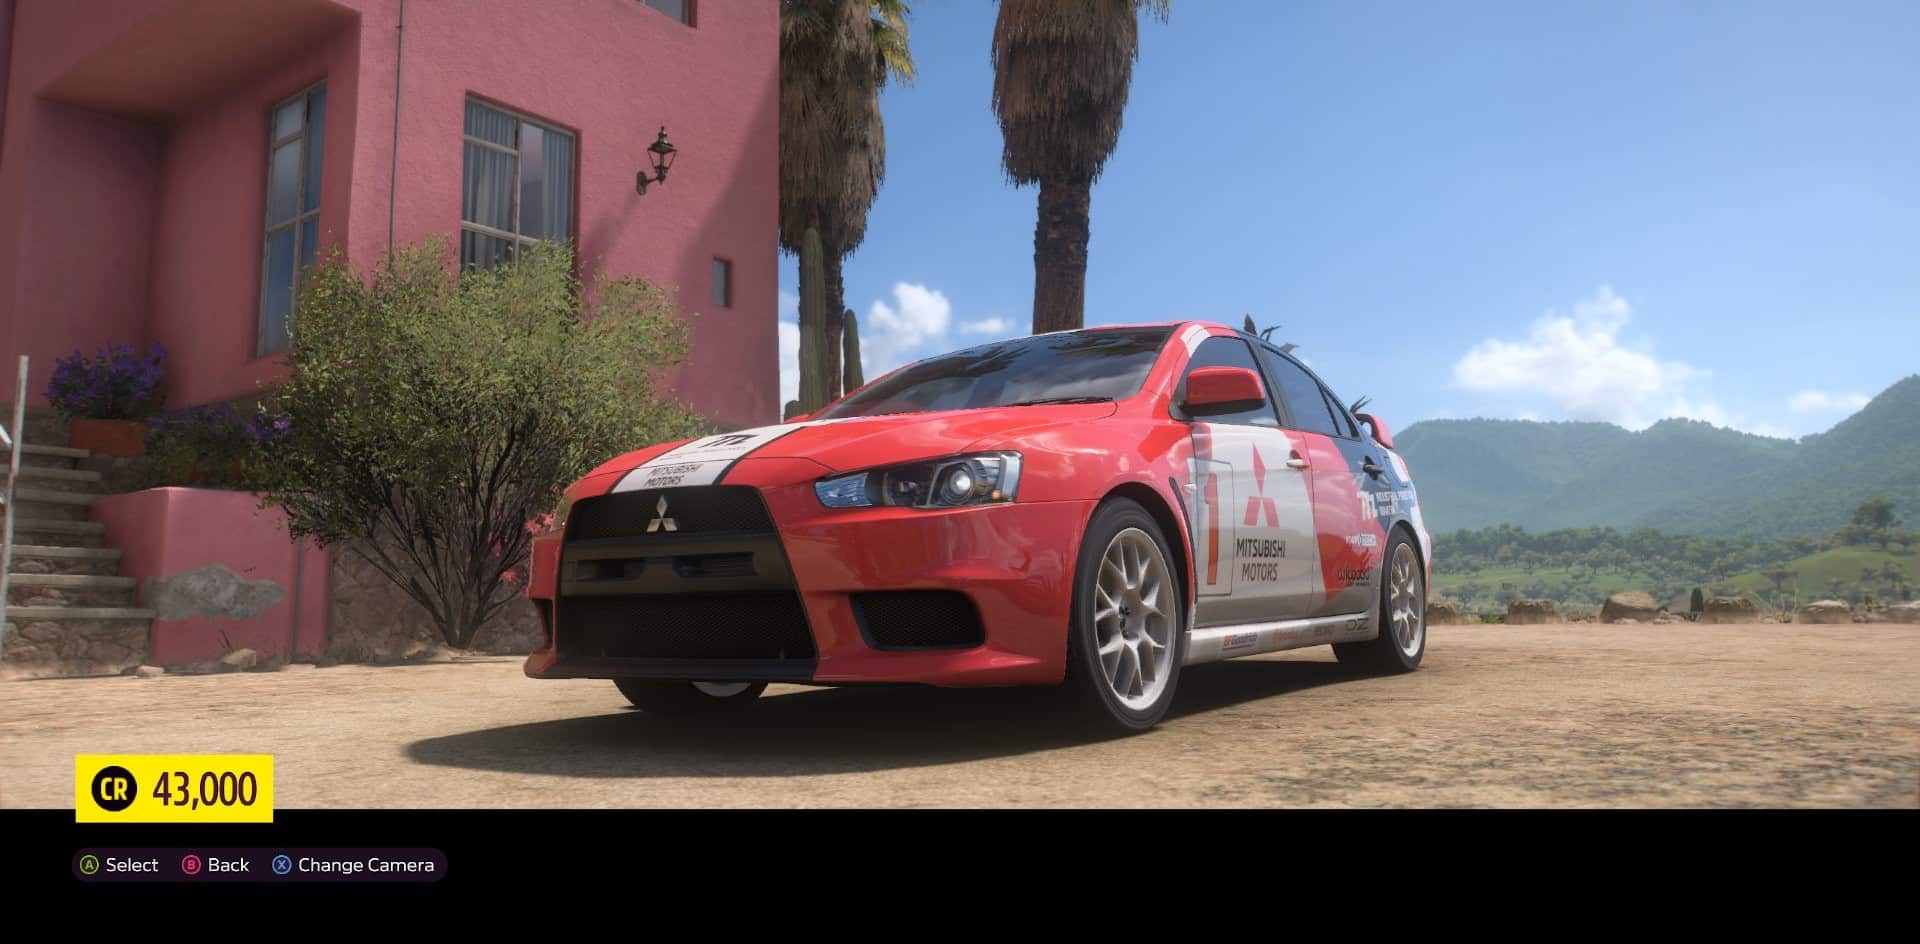 The Mitsubishi Lancer Evo, one of the best rally cars, sits on open ground in Forza Horizon 5